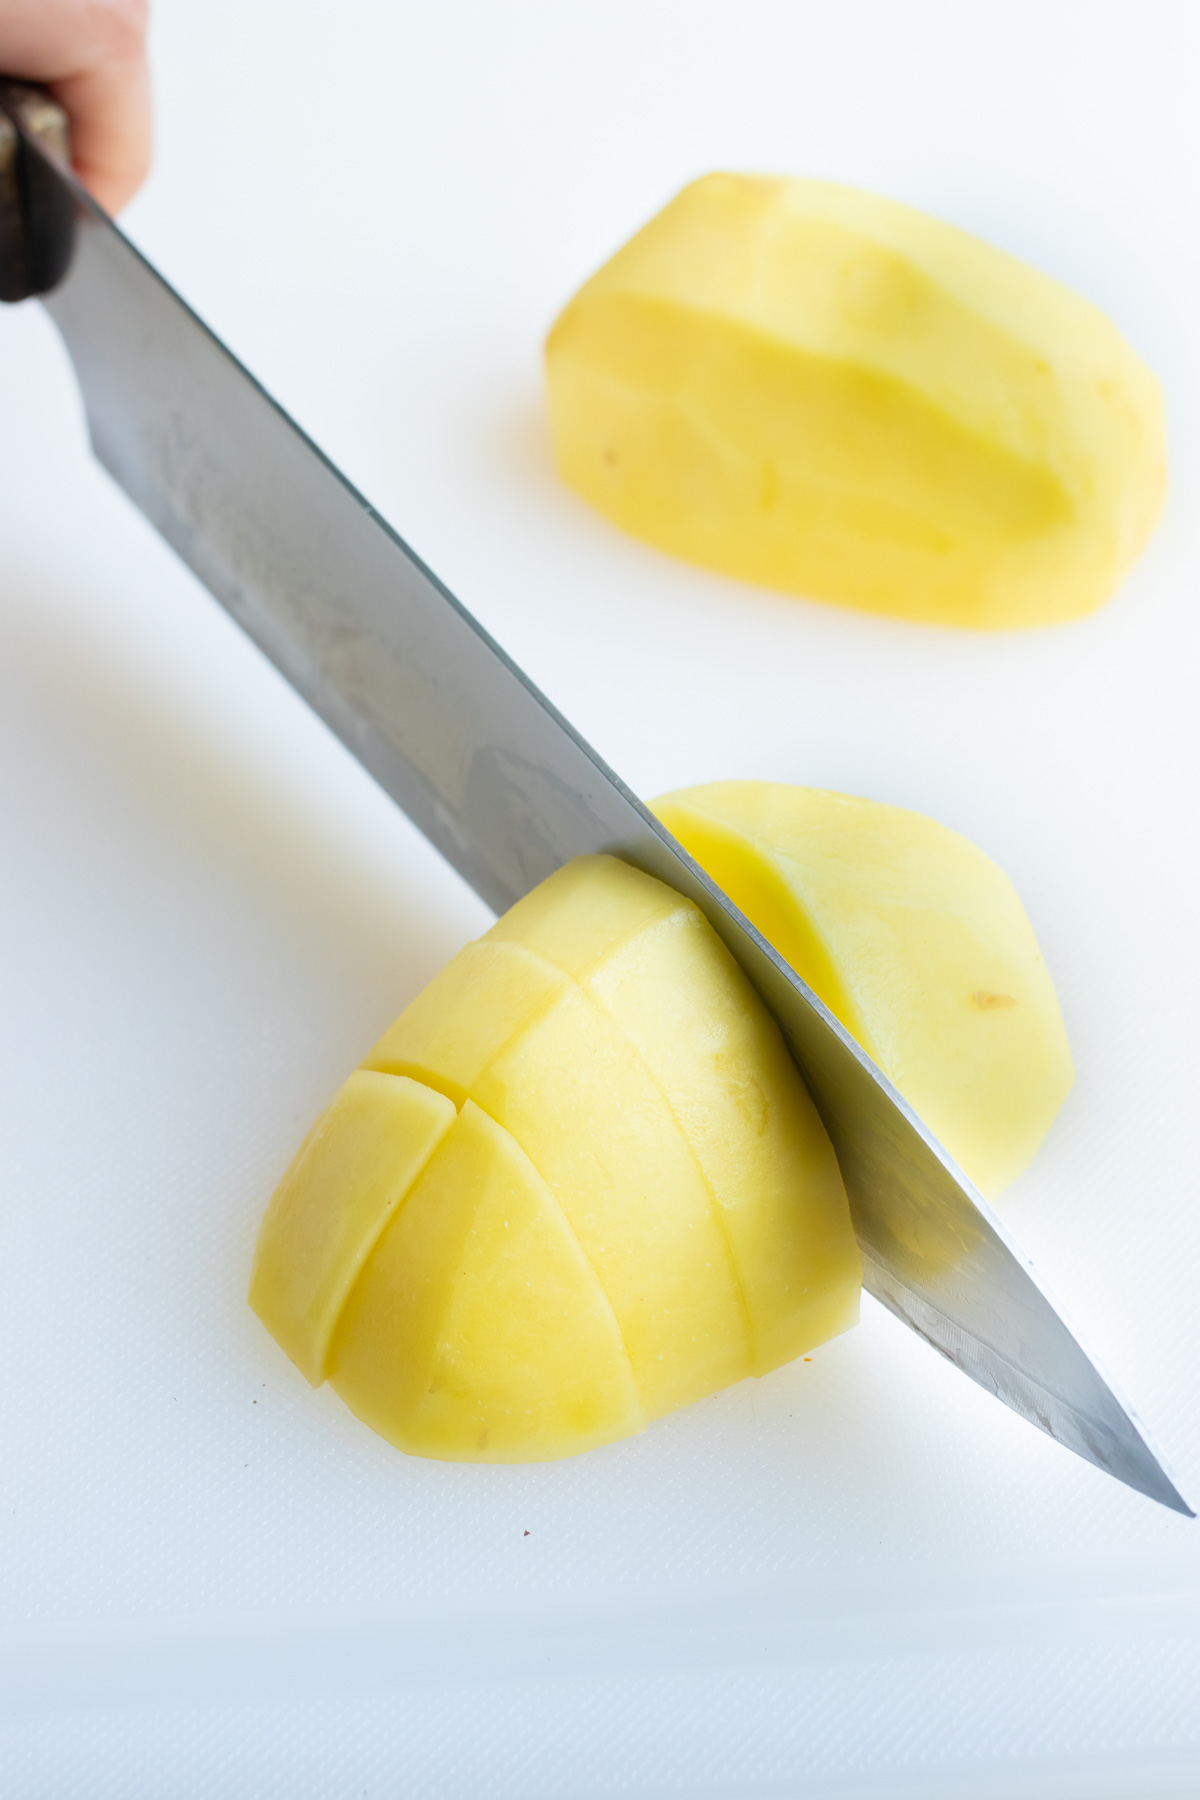 Peeled potatoes are chopped into cubes before cooking.